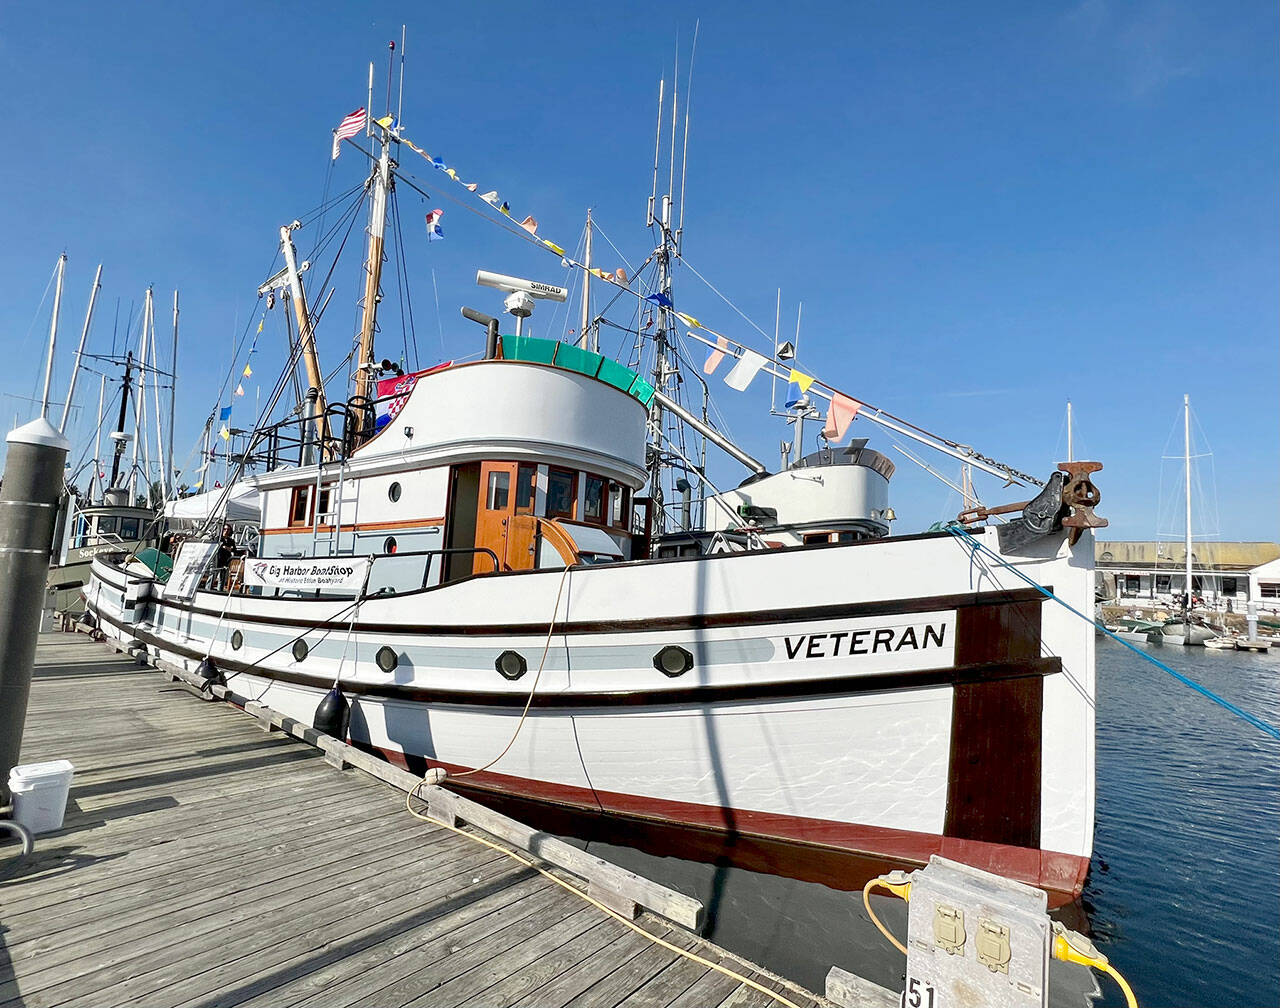 Veteran, a 55-foot purse seiner built in Gig Harbor in 1926, is one of the featured wooden boats in the 45th Wooden Boat Festival in Port Townsend. The festival is at the Point Hudson Marina, starts today and runs until Sunday. (Steve Mullensky/for Peninsula Daily News)